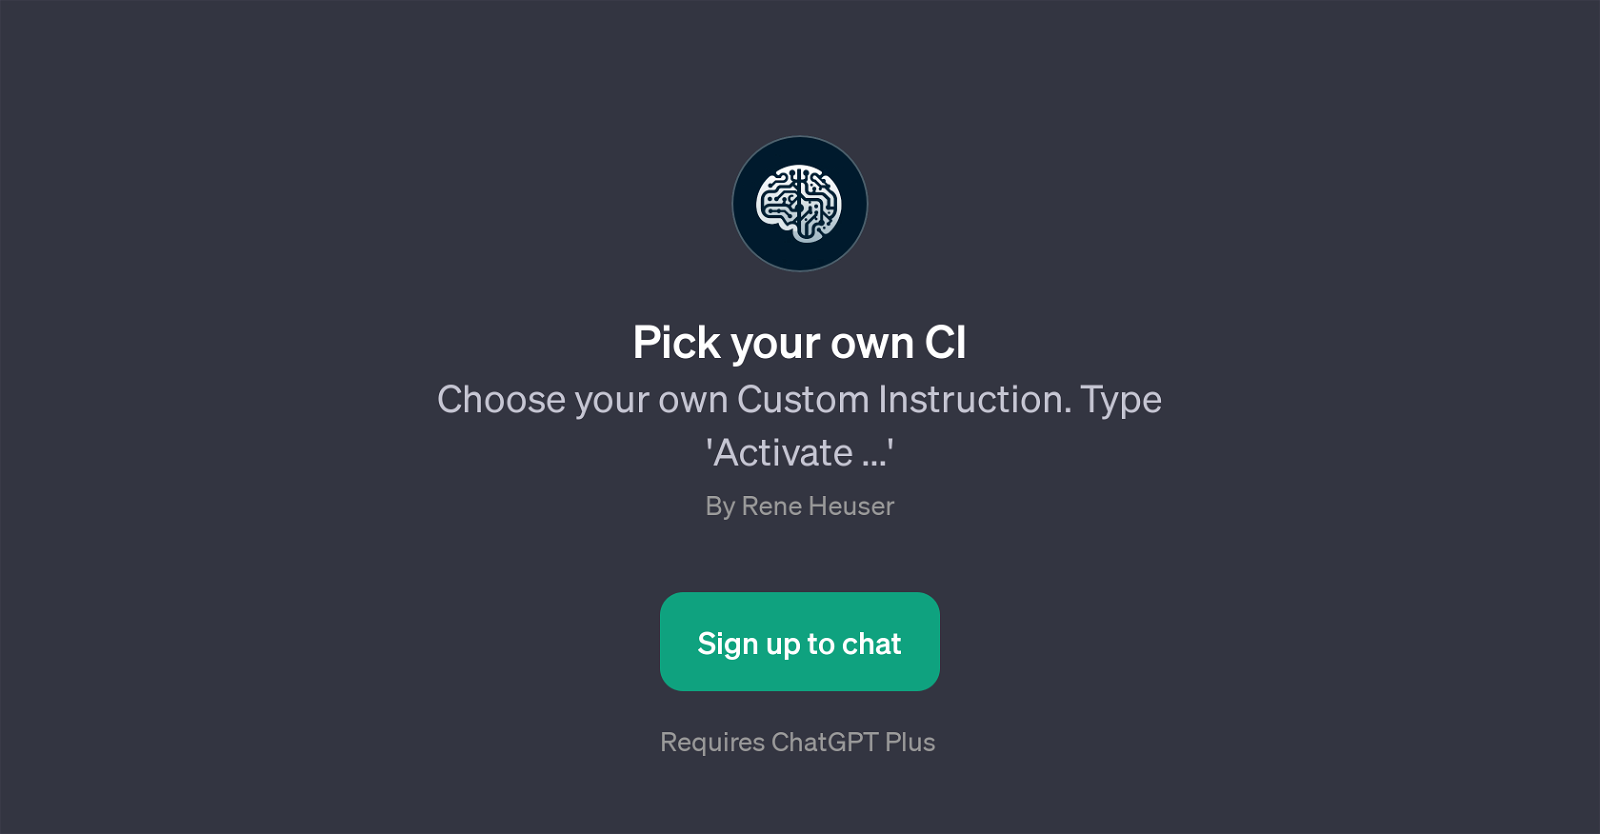 Pick your own CI website